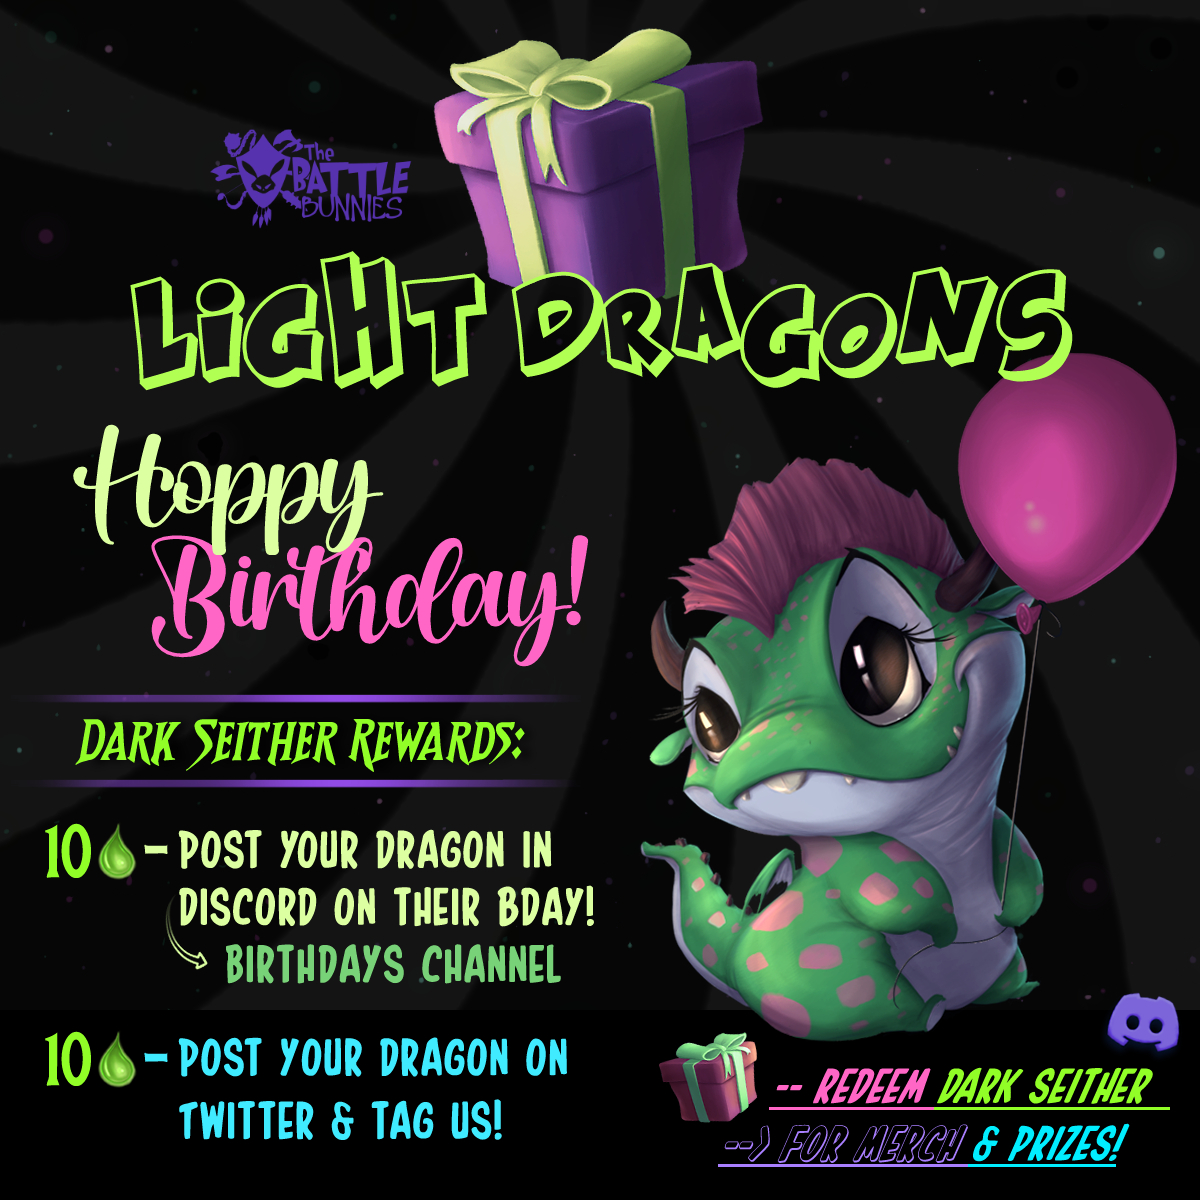 Hoppy Birthday to all of the Light Dragons celebrating over the next couple months! 🥳🥳

Do you have a Light Dragon?

If so, you can earn Dark Seither while you celebrate 🎂

💧 Play --> Earn --> Win 🎁
#DarkSeitherGames #BattleBunnies #Dragons #HappyBirthday #FluffleFam #Play